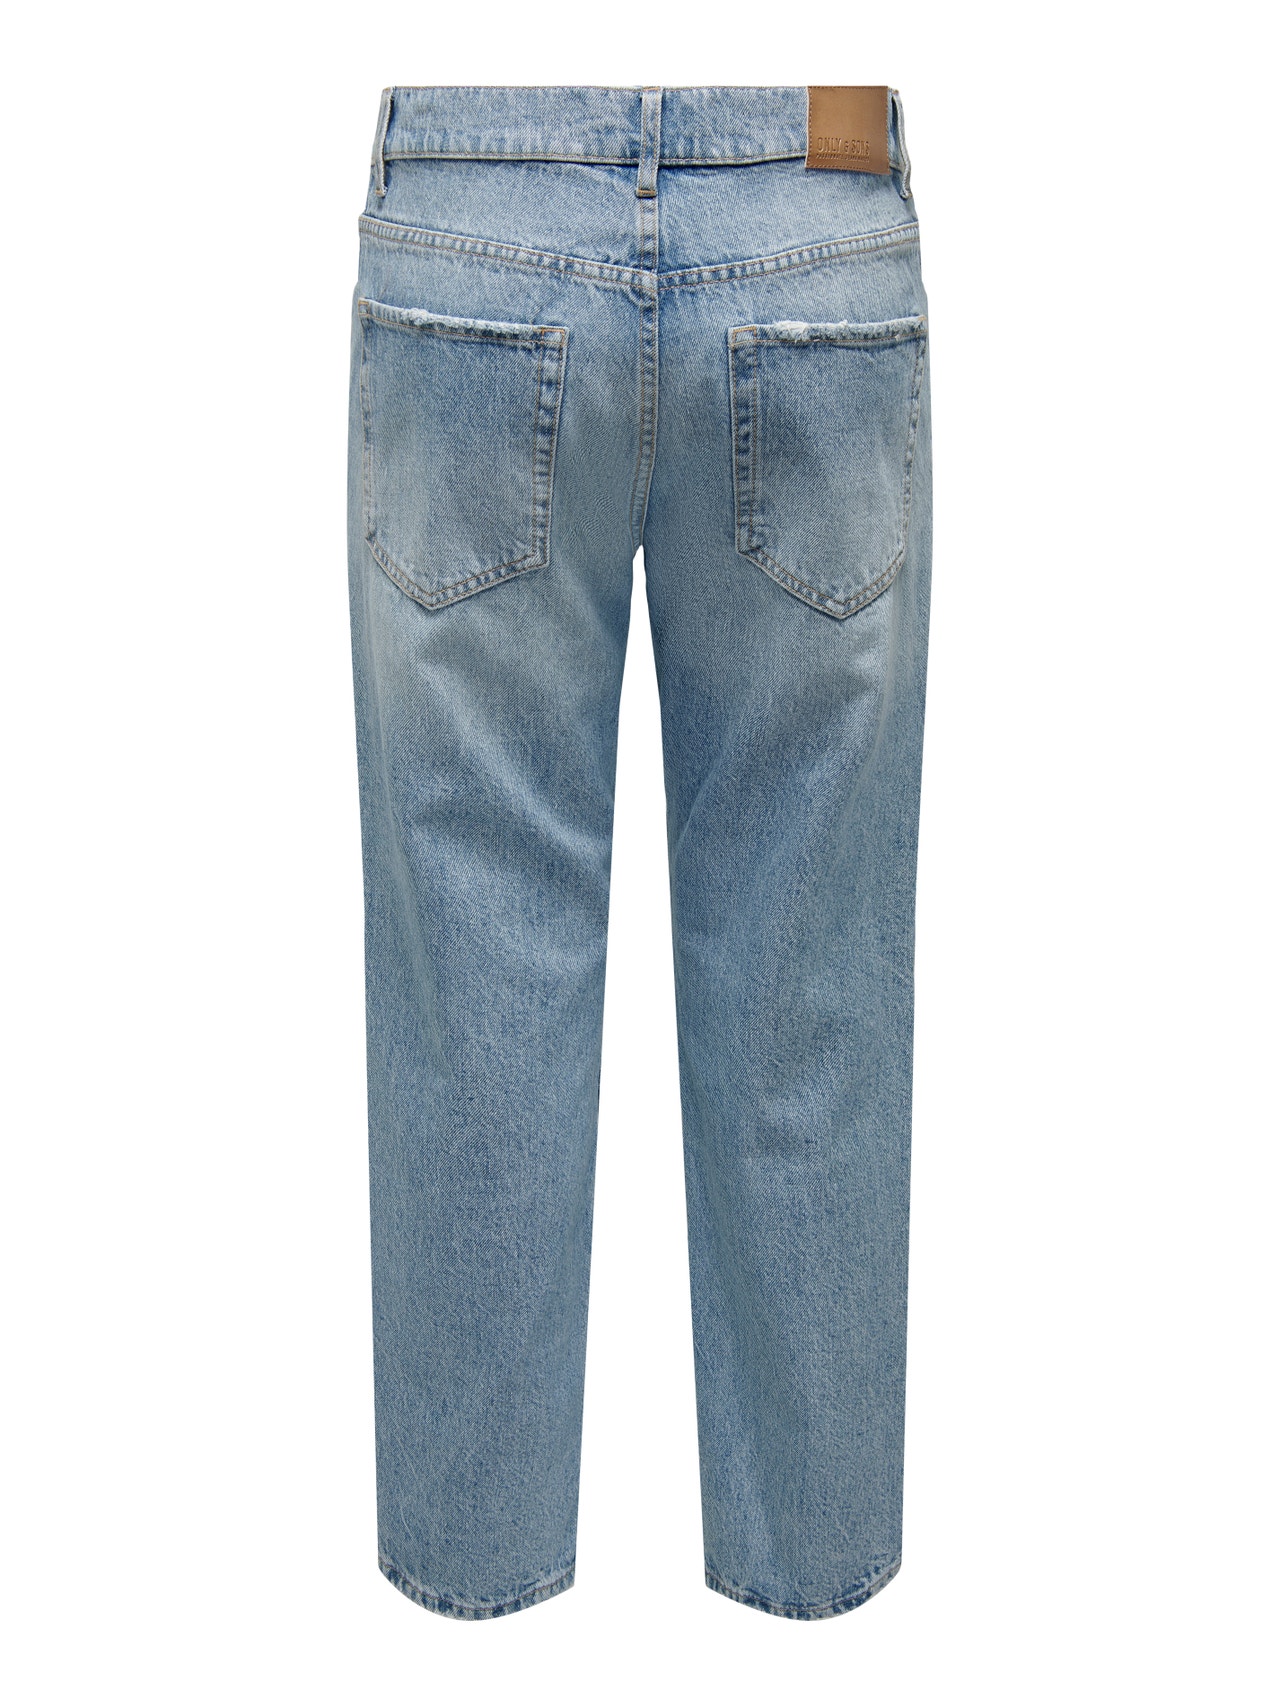 ONLY & SONS Straight Fit Mid waist Jeans -Light Blue Denim - 22026986